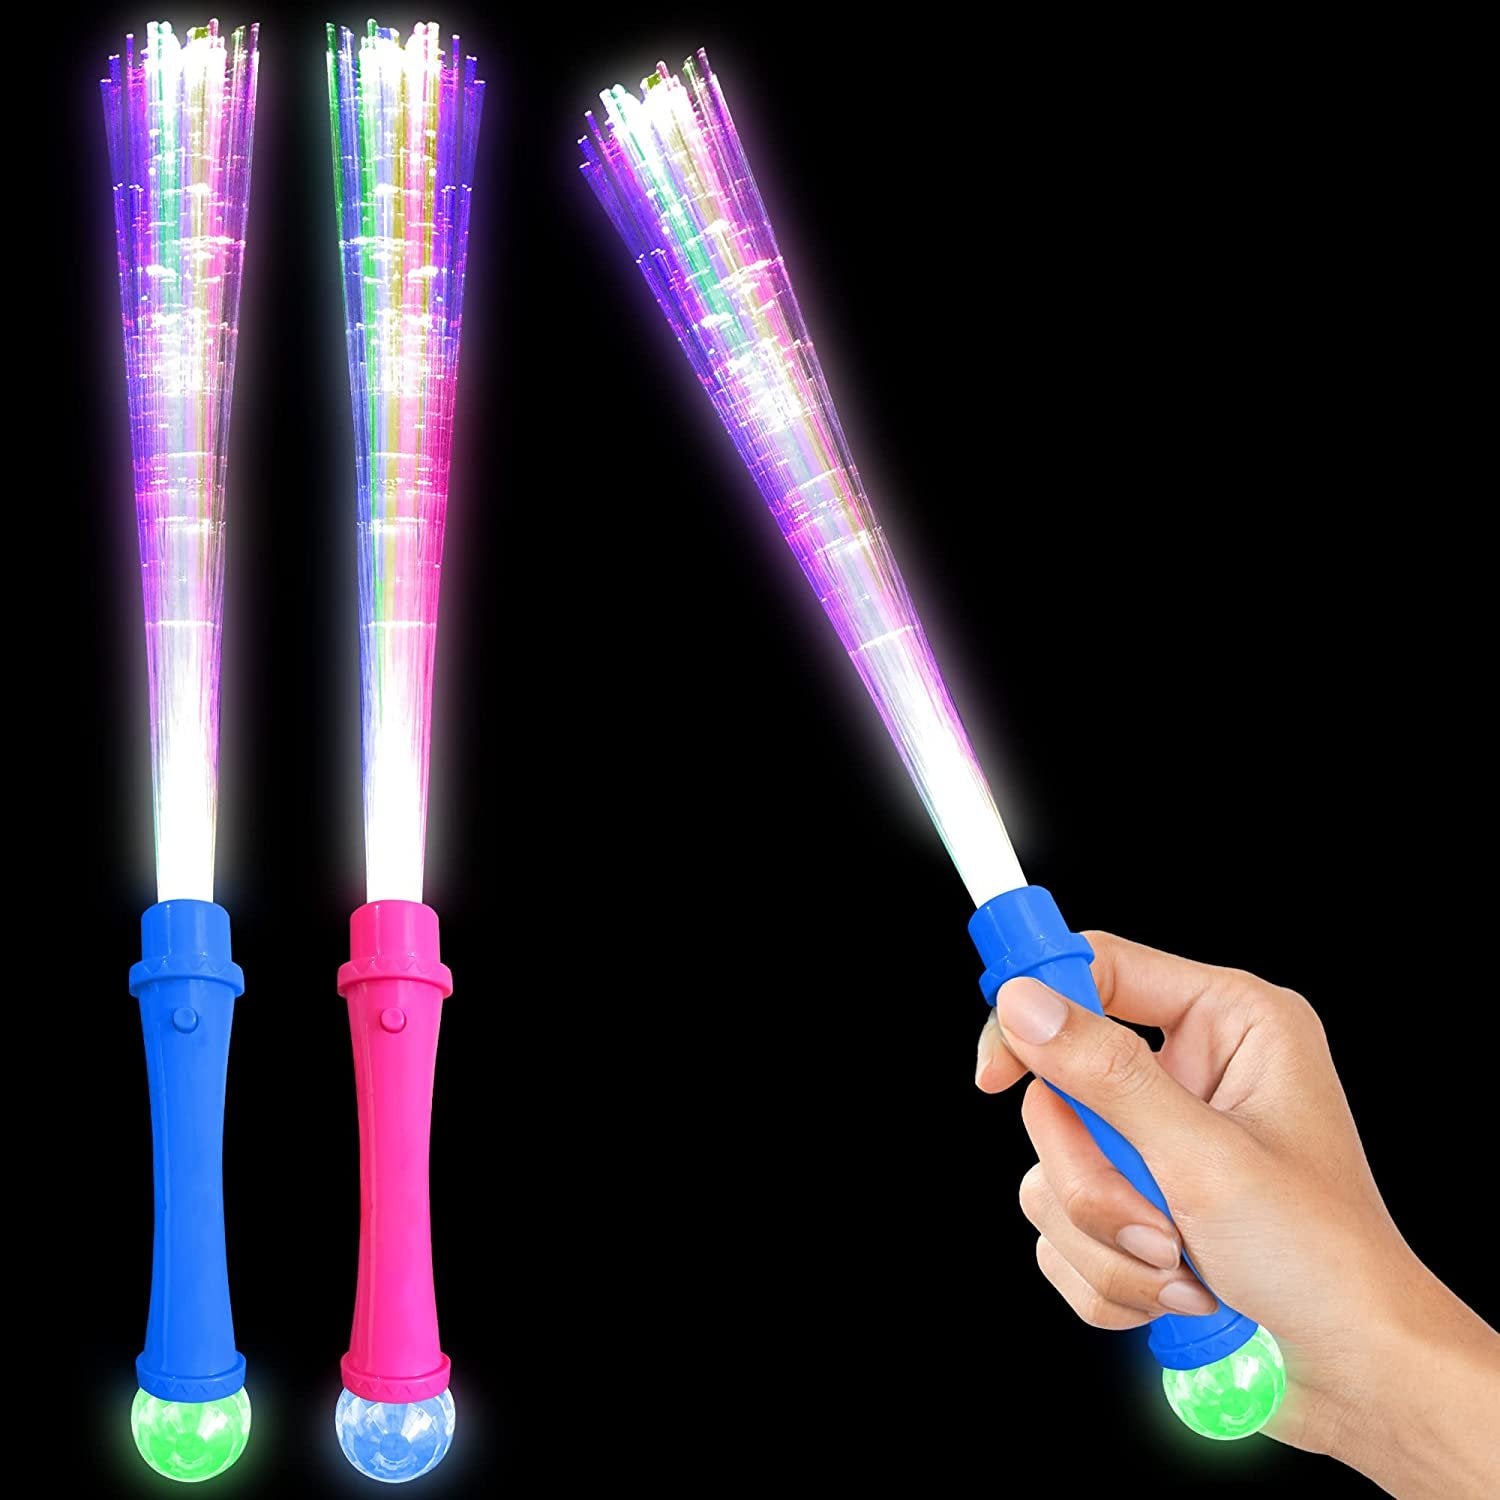 ArtCreativity Flashing Magic Ball Fiber Optic Wand, Set of 2, Light Up Pink and Blue LED Toy Wands for Kids with Batteries Included, Fun Light-Up Birthday Party Favors, Goodie Bag Fillers